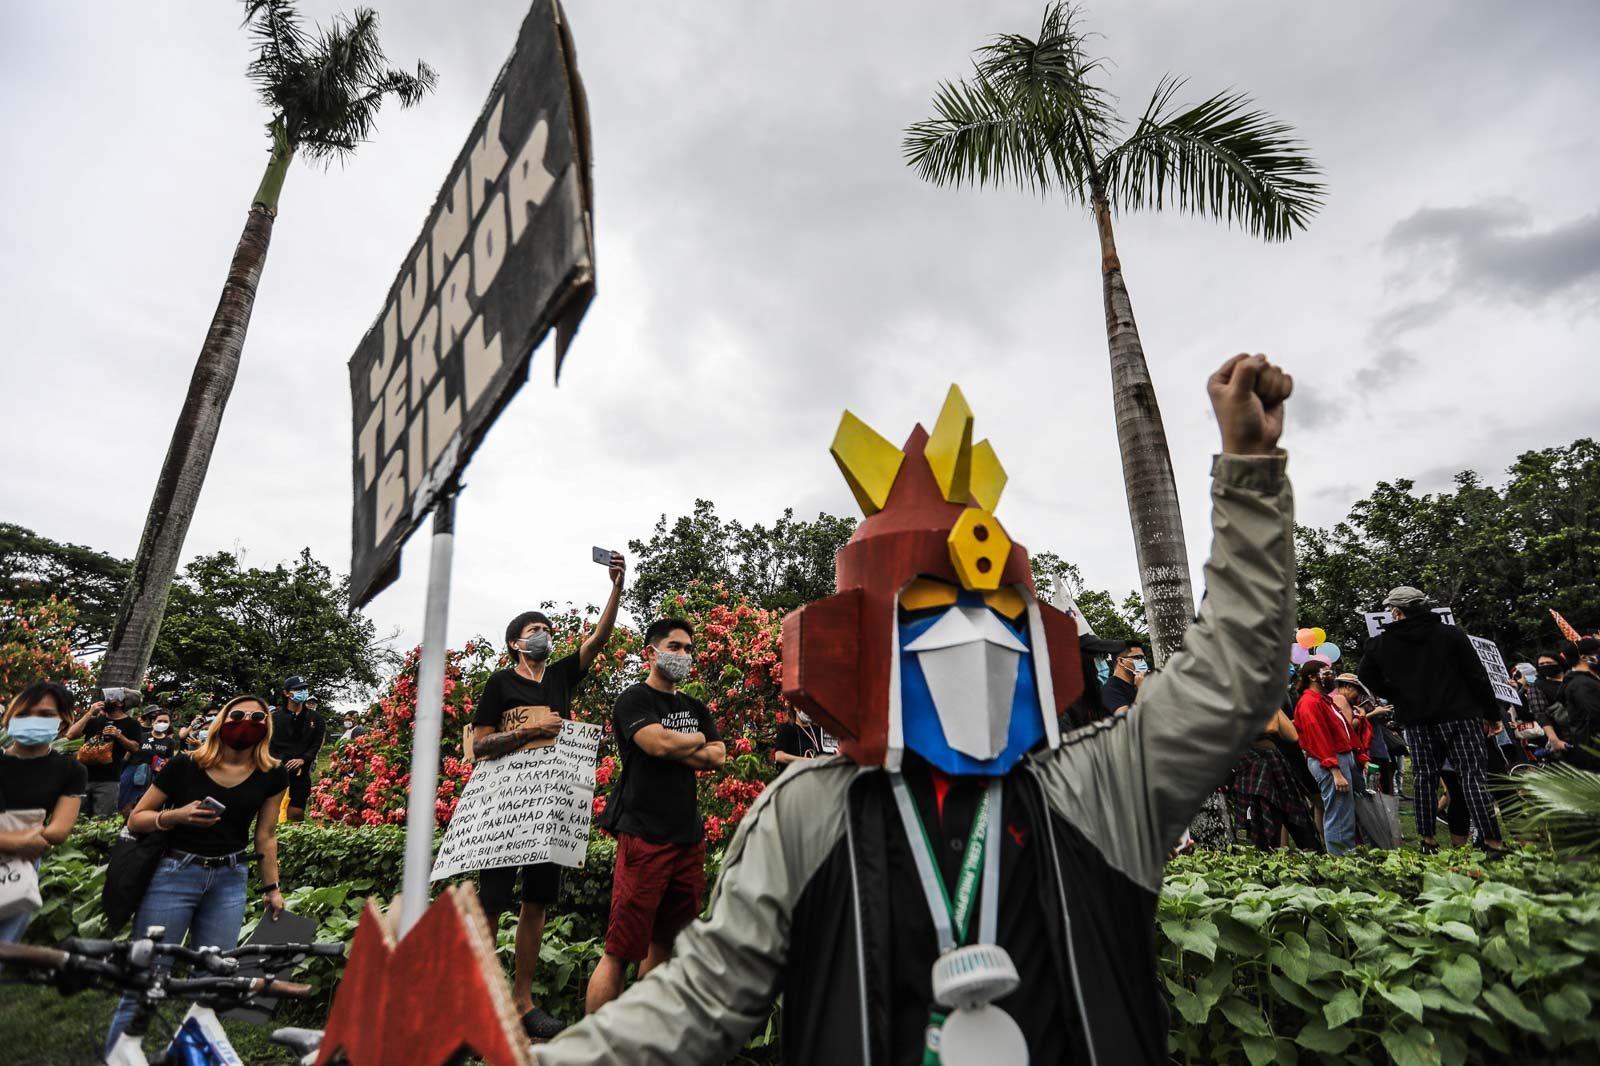 CREATIVE. The youth brought out their creative side in the assembly, fashioning their own party hats, fake cakes and roses, and Voltes V masks. Photo by Jire Carreon/Rappler 